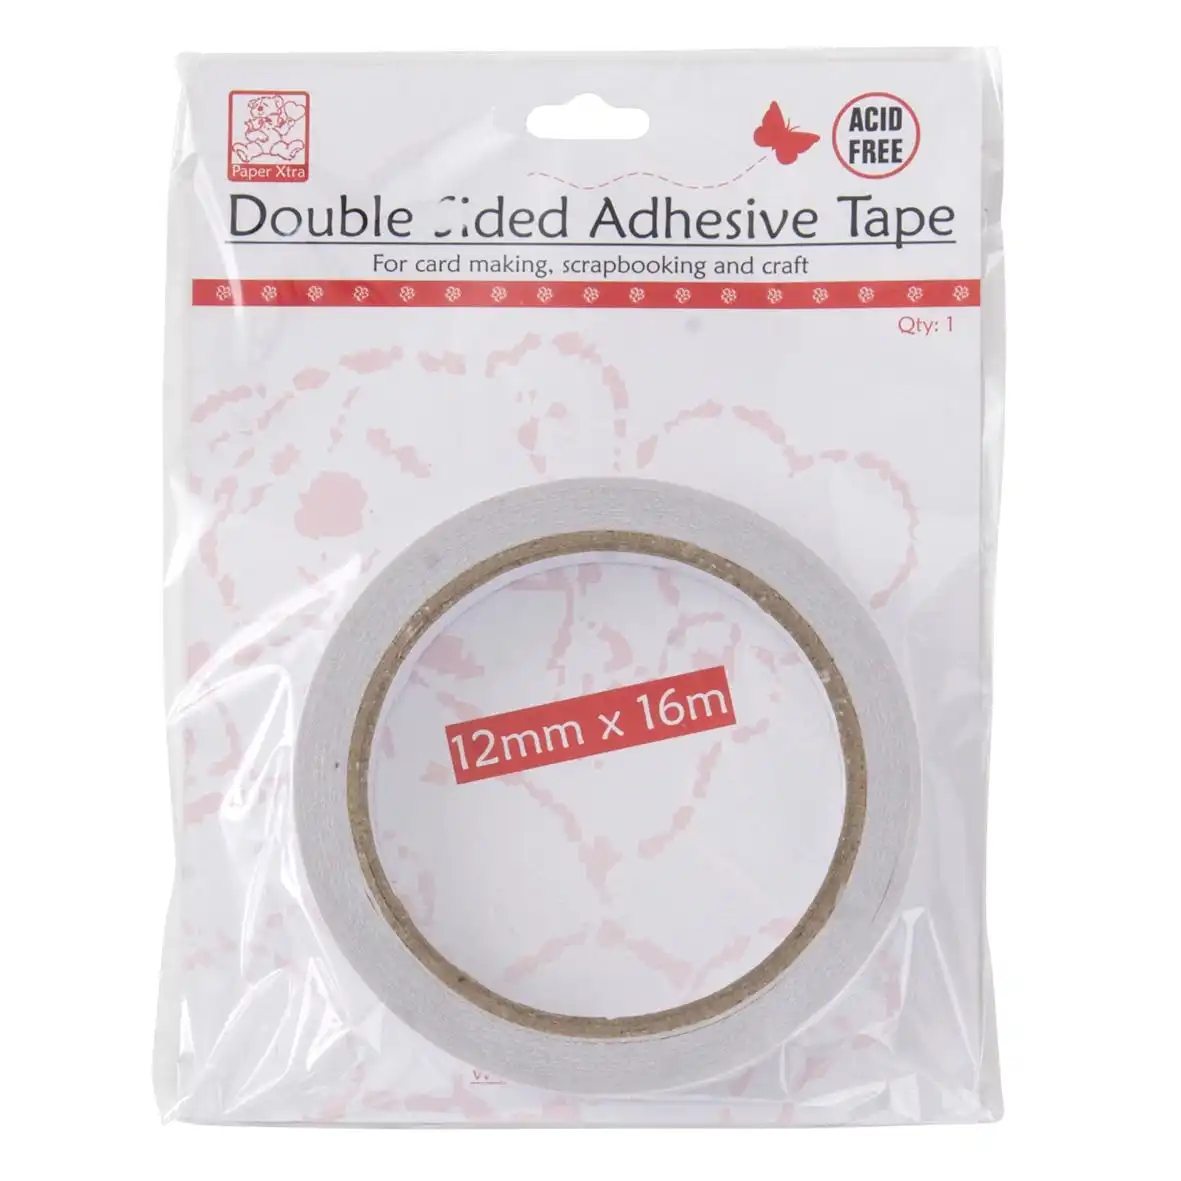 Sullivans Double Sided Adhesive Tape- 12mm